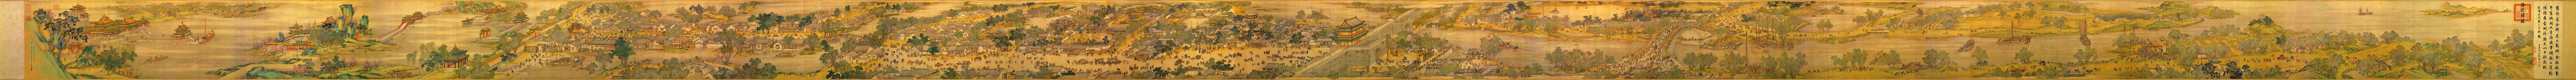 Panorama of Along the River During Qingming Festival, an 11-meter handscroll by artists of the Qing court